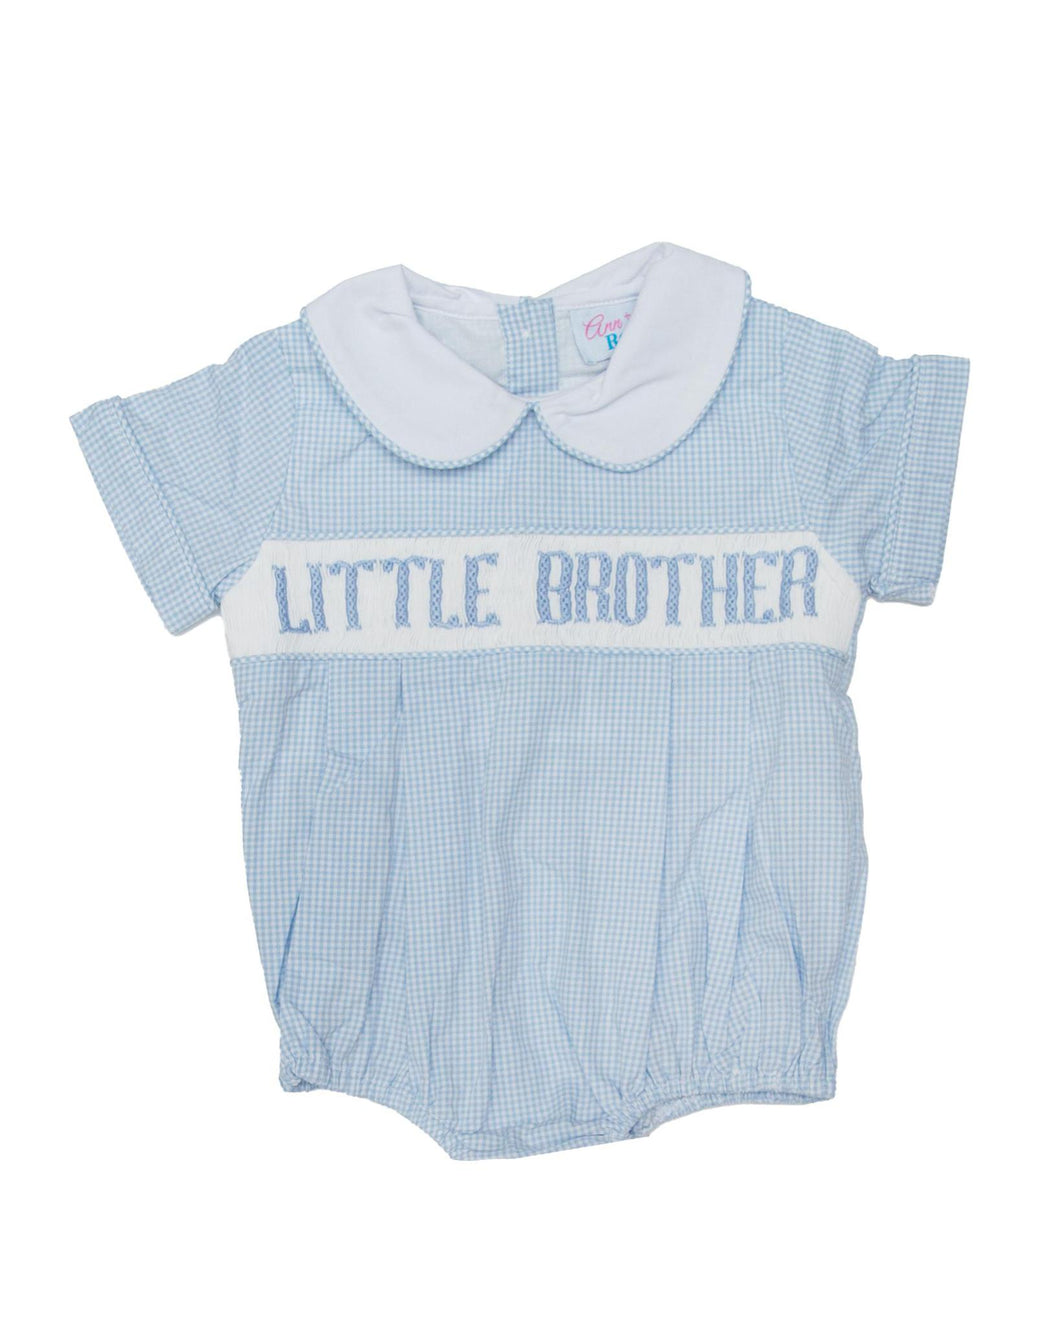 Little Brother - Blue Gingham Henry Bubble